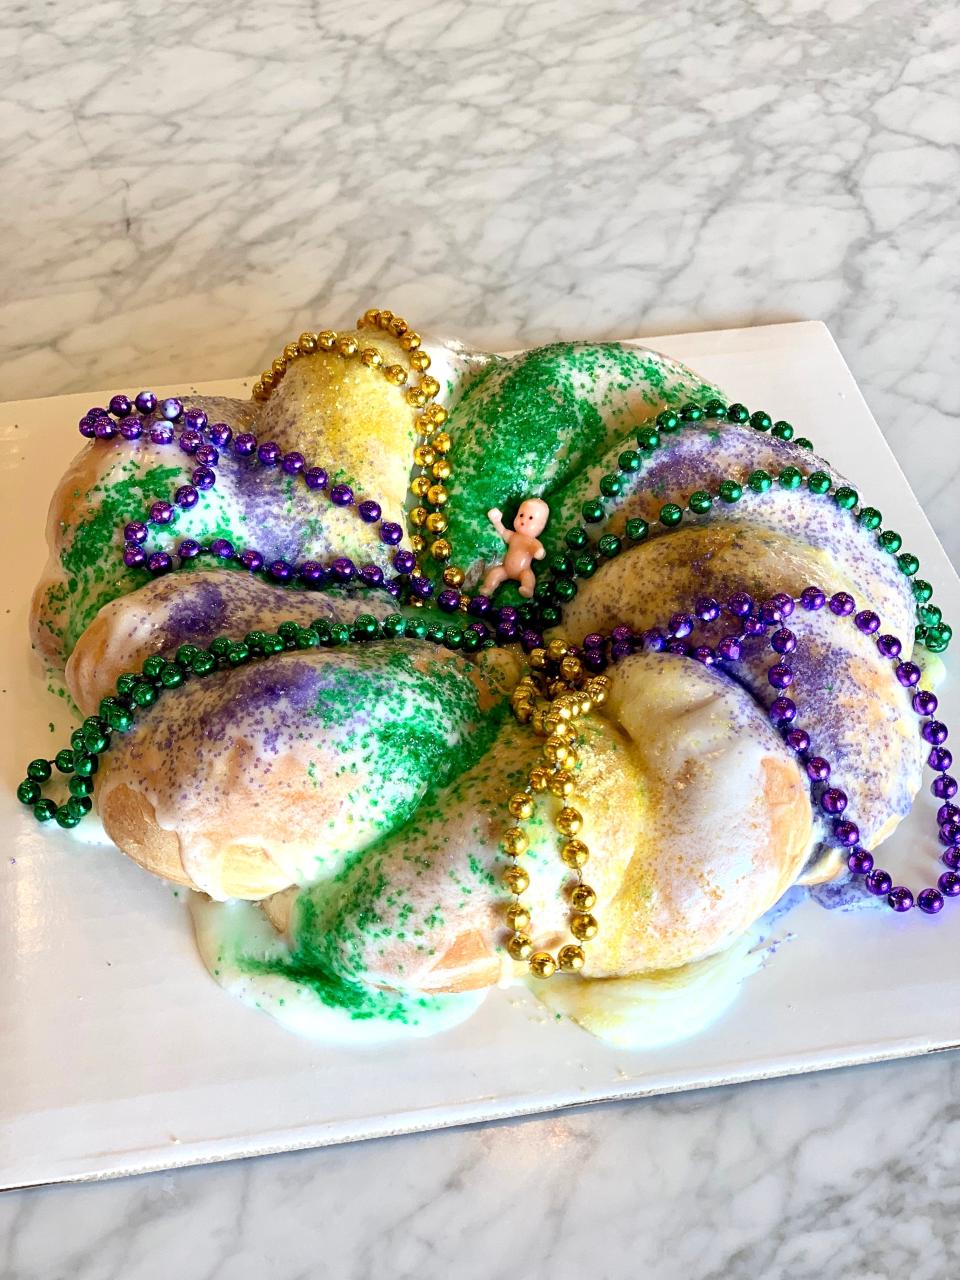 Sweet LaLa's Bakery is making King Cakes for this year's Mardi Gras season. Cakes are available only as special orders.